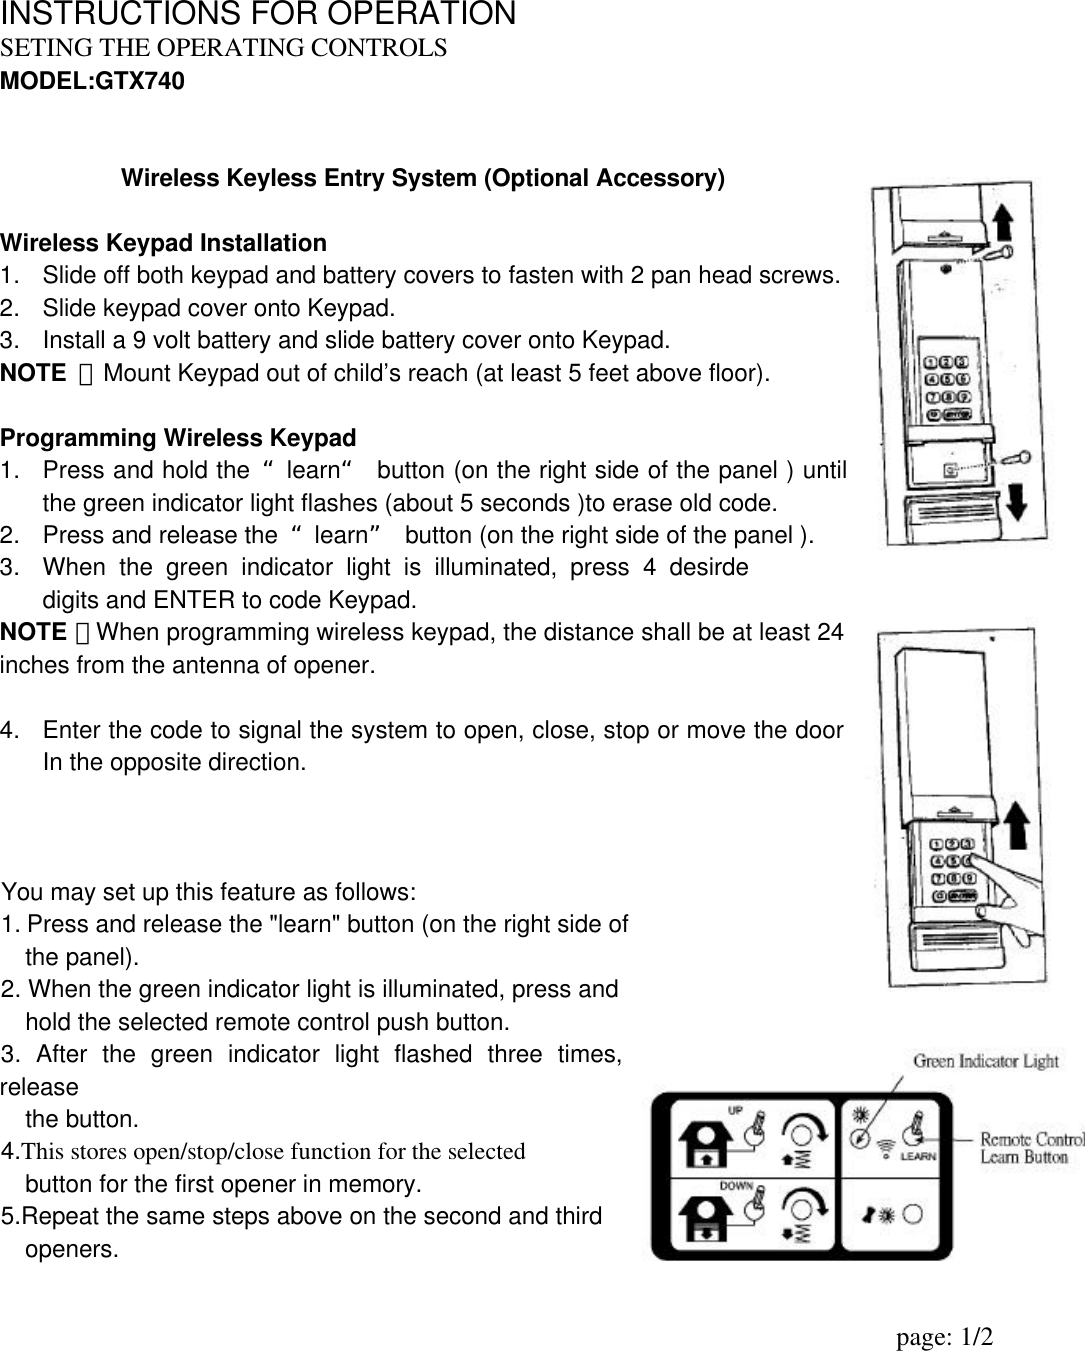 INSTRUCTIONS FOR OPERATION SETING THE OPERATING CONTROLS                   MODEL:GTX740   Wireless Keyless Entry System (Optional Accessory)   Wireless Keypad Installation 1. Slide off both keypad and battery covers to fasten with 2 pan head screws. 2. Slide keypad cover onto Keypad. 3. Install a 9 volt battery and slide battery cover onto Keypad. NOTE  ：Mount Keypad out of child’s reach (at least 5 feet above floor).  Programming Wireless Keypad 1. Press and hold the “learn“ button (on the right side of the panel ) until the green indicator light flashes (about 5 seconds )to erase old code. 2. Press and release the  “learn” button (on the right side of the panel ). 3. When the green indicator light is illuminated, press 4 desirde digits and ENTER to code Keypad. NOTE ：When programming wireless keypad, the distance shall be at least 24 inches from the antenna of opener.  4. Enter the code to signal the system to open, close, stop or move the door In the opposite direction.      You may set up this feature as follows: 1. Press and release the &quot;learn&quot; button (on the right side of     the panel).   2. When the green indicator light is illuminated, press and       hold the selected remote control push button.   3. After the green indicator light flashed three times, release       the button. 4.This stores open/stop/close function for the selected     button for the first opener in memory. 5.Repeat the same steps above on the second and third      openers.                                                                         page: 1/2                  